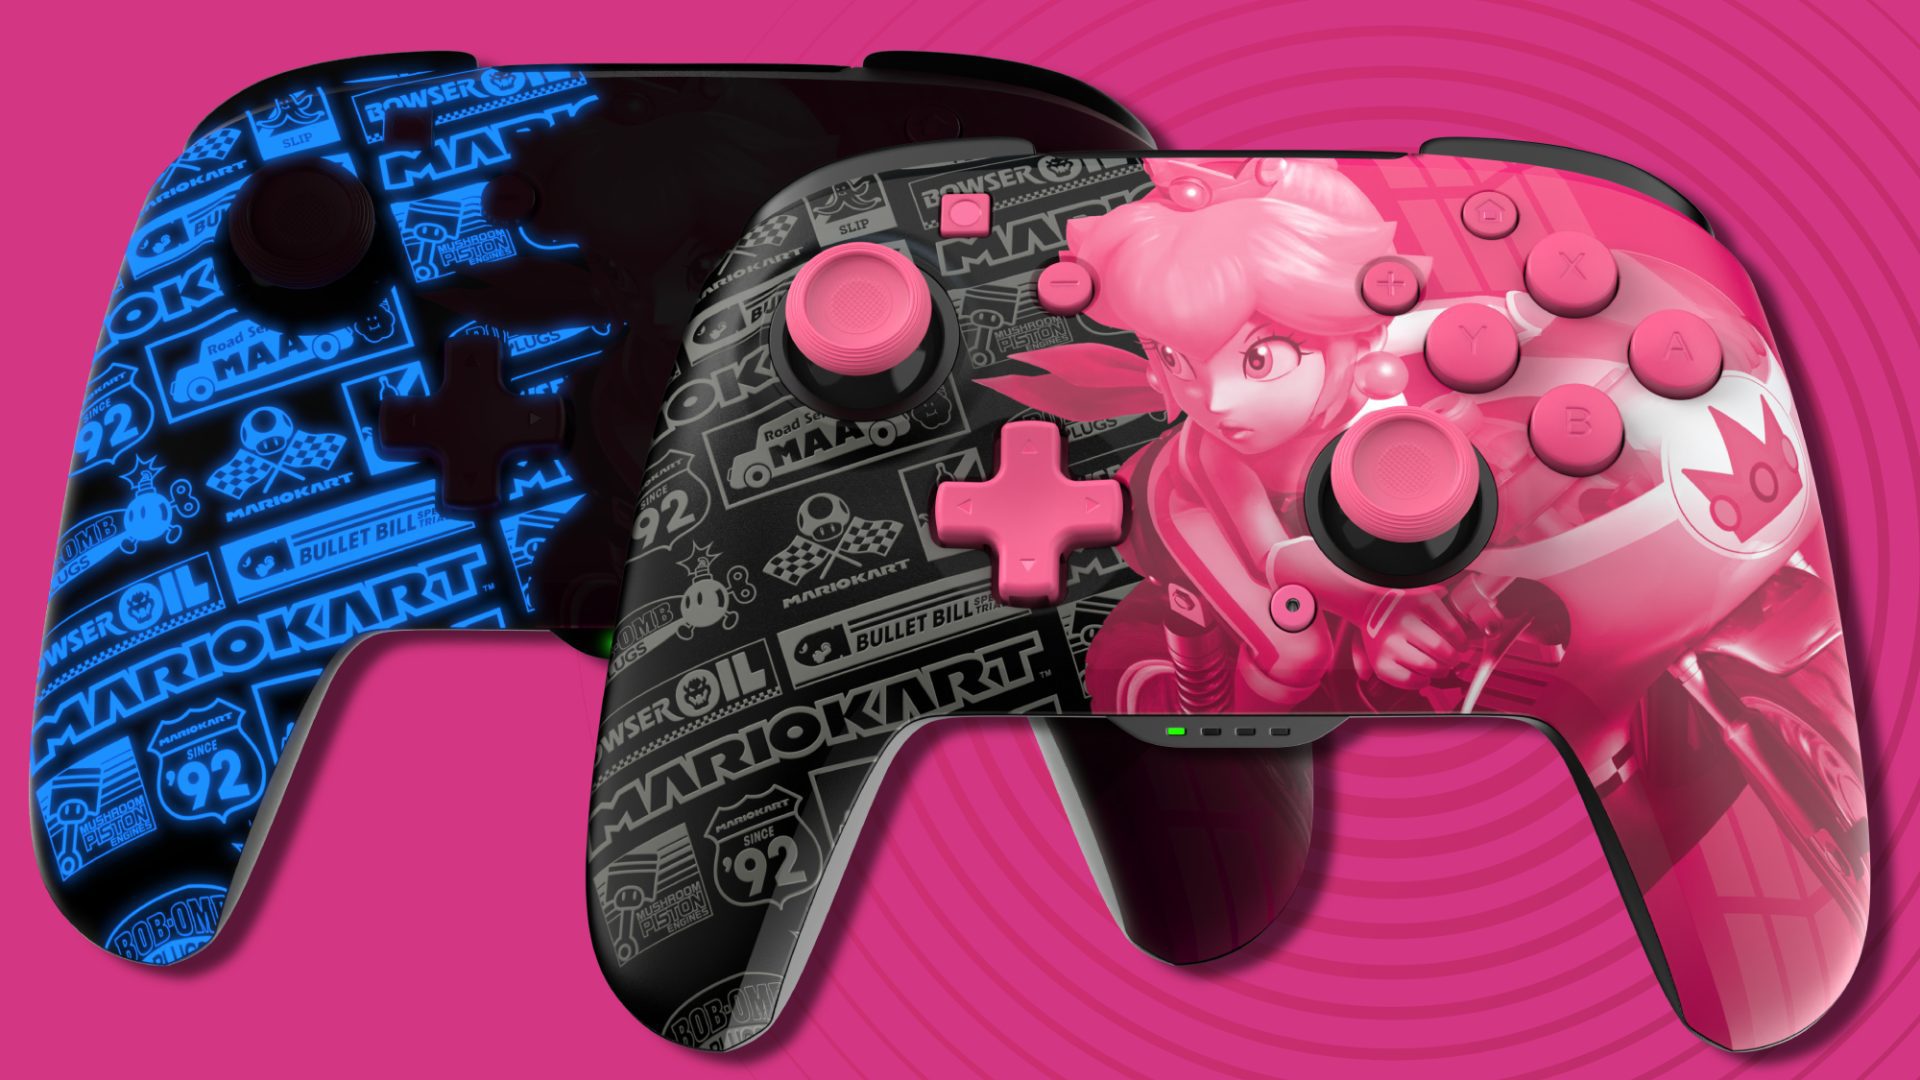 The PDP Rematch Glow Edition “Grand Prix Peach” launches just before Princess Peach: Showtime!